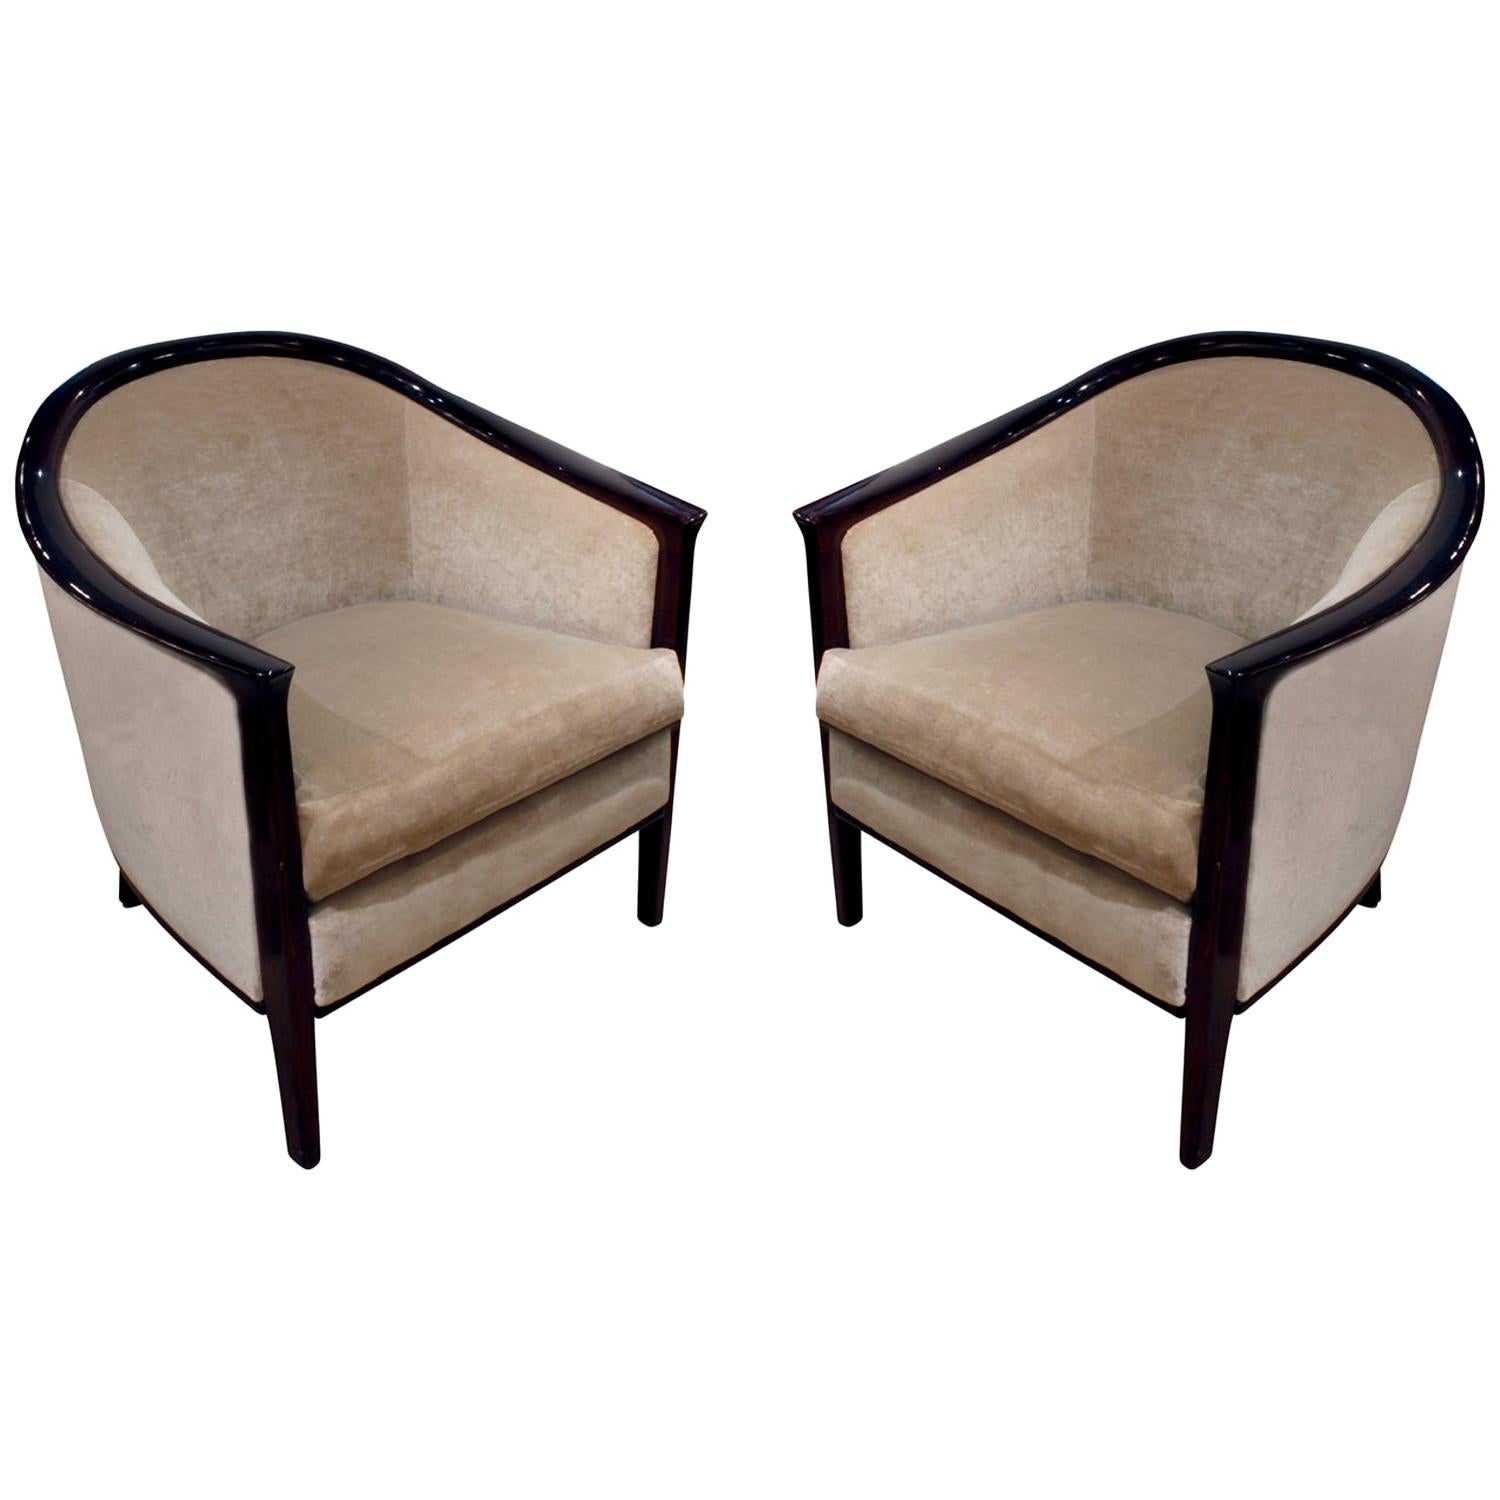 Pair of Art Deco Barrel Back Lounge Chairs with Mahogany Frames, 1930s